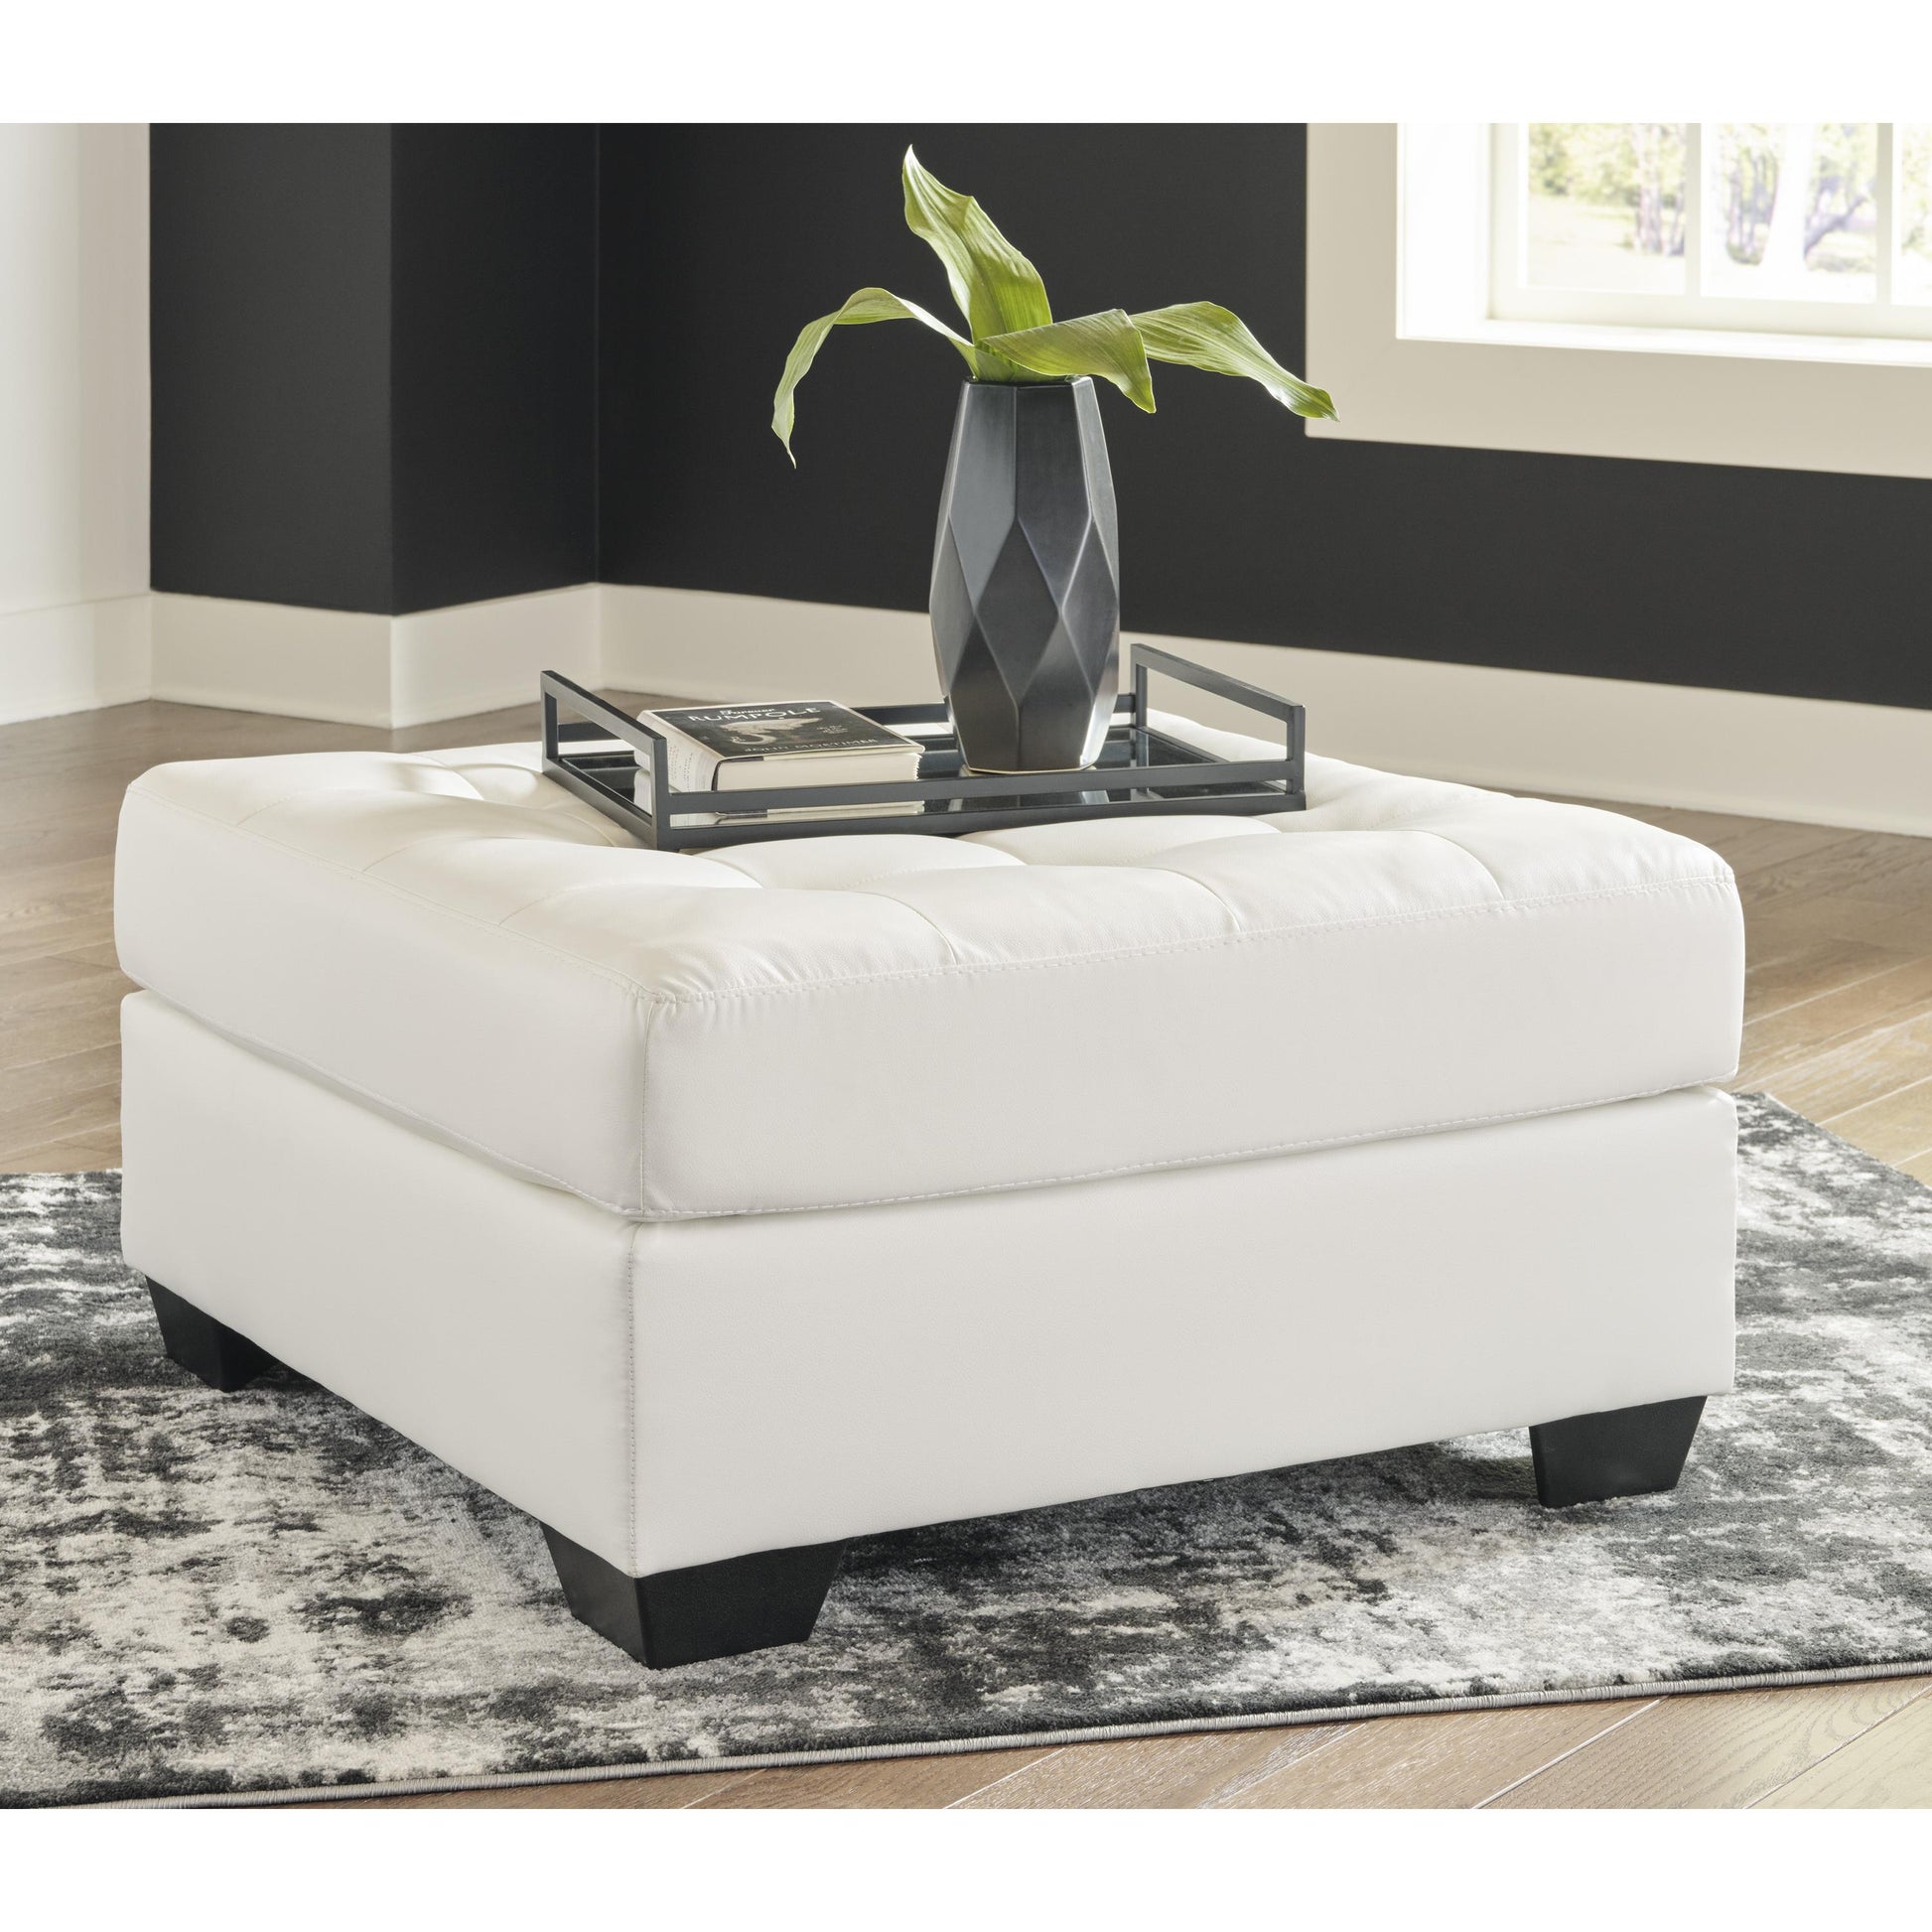 Signature Design by Ashley Donlen Leather Look Ottoman 5970308 IMAGE 4